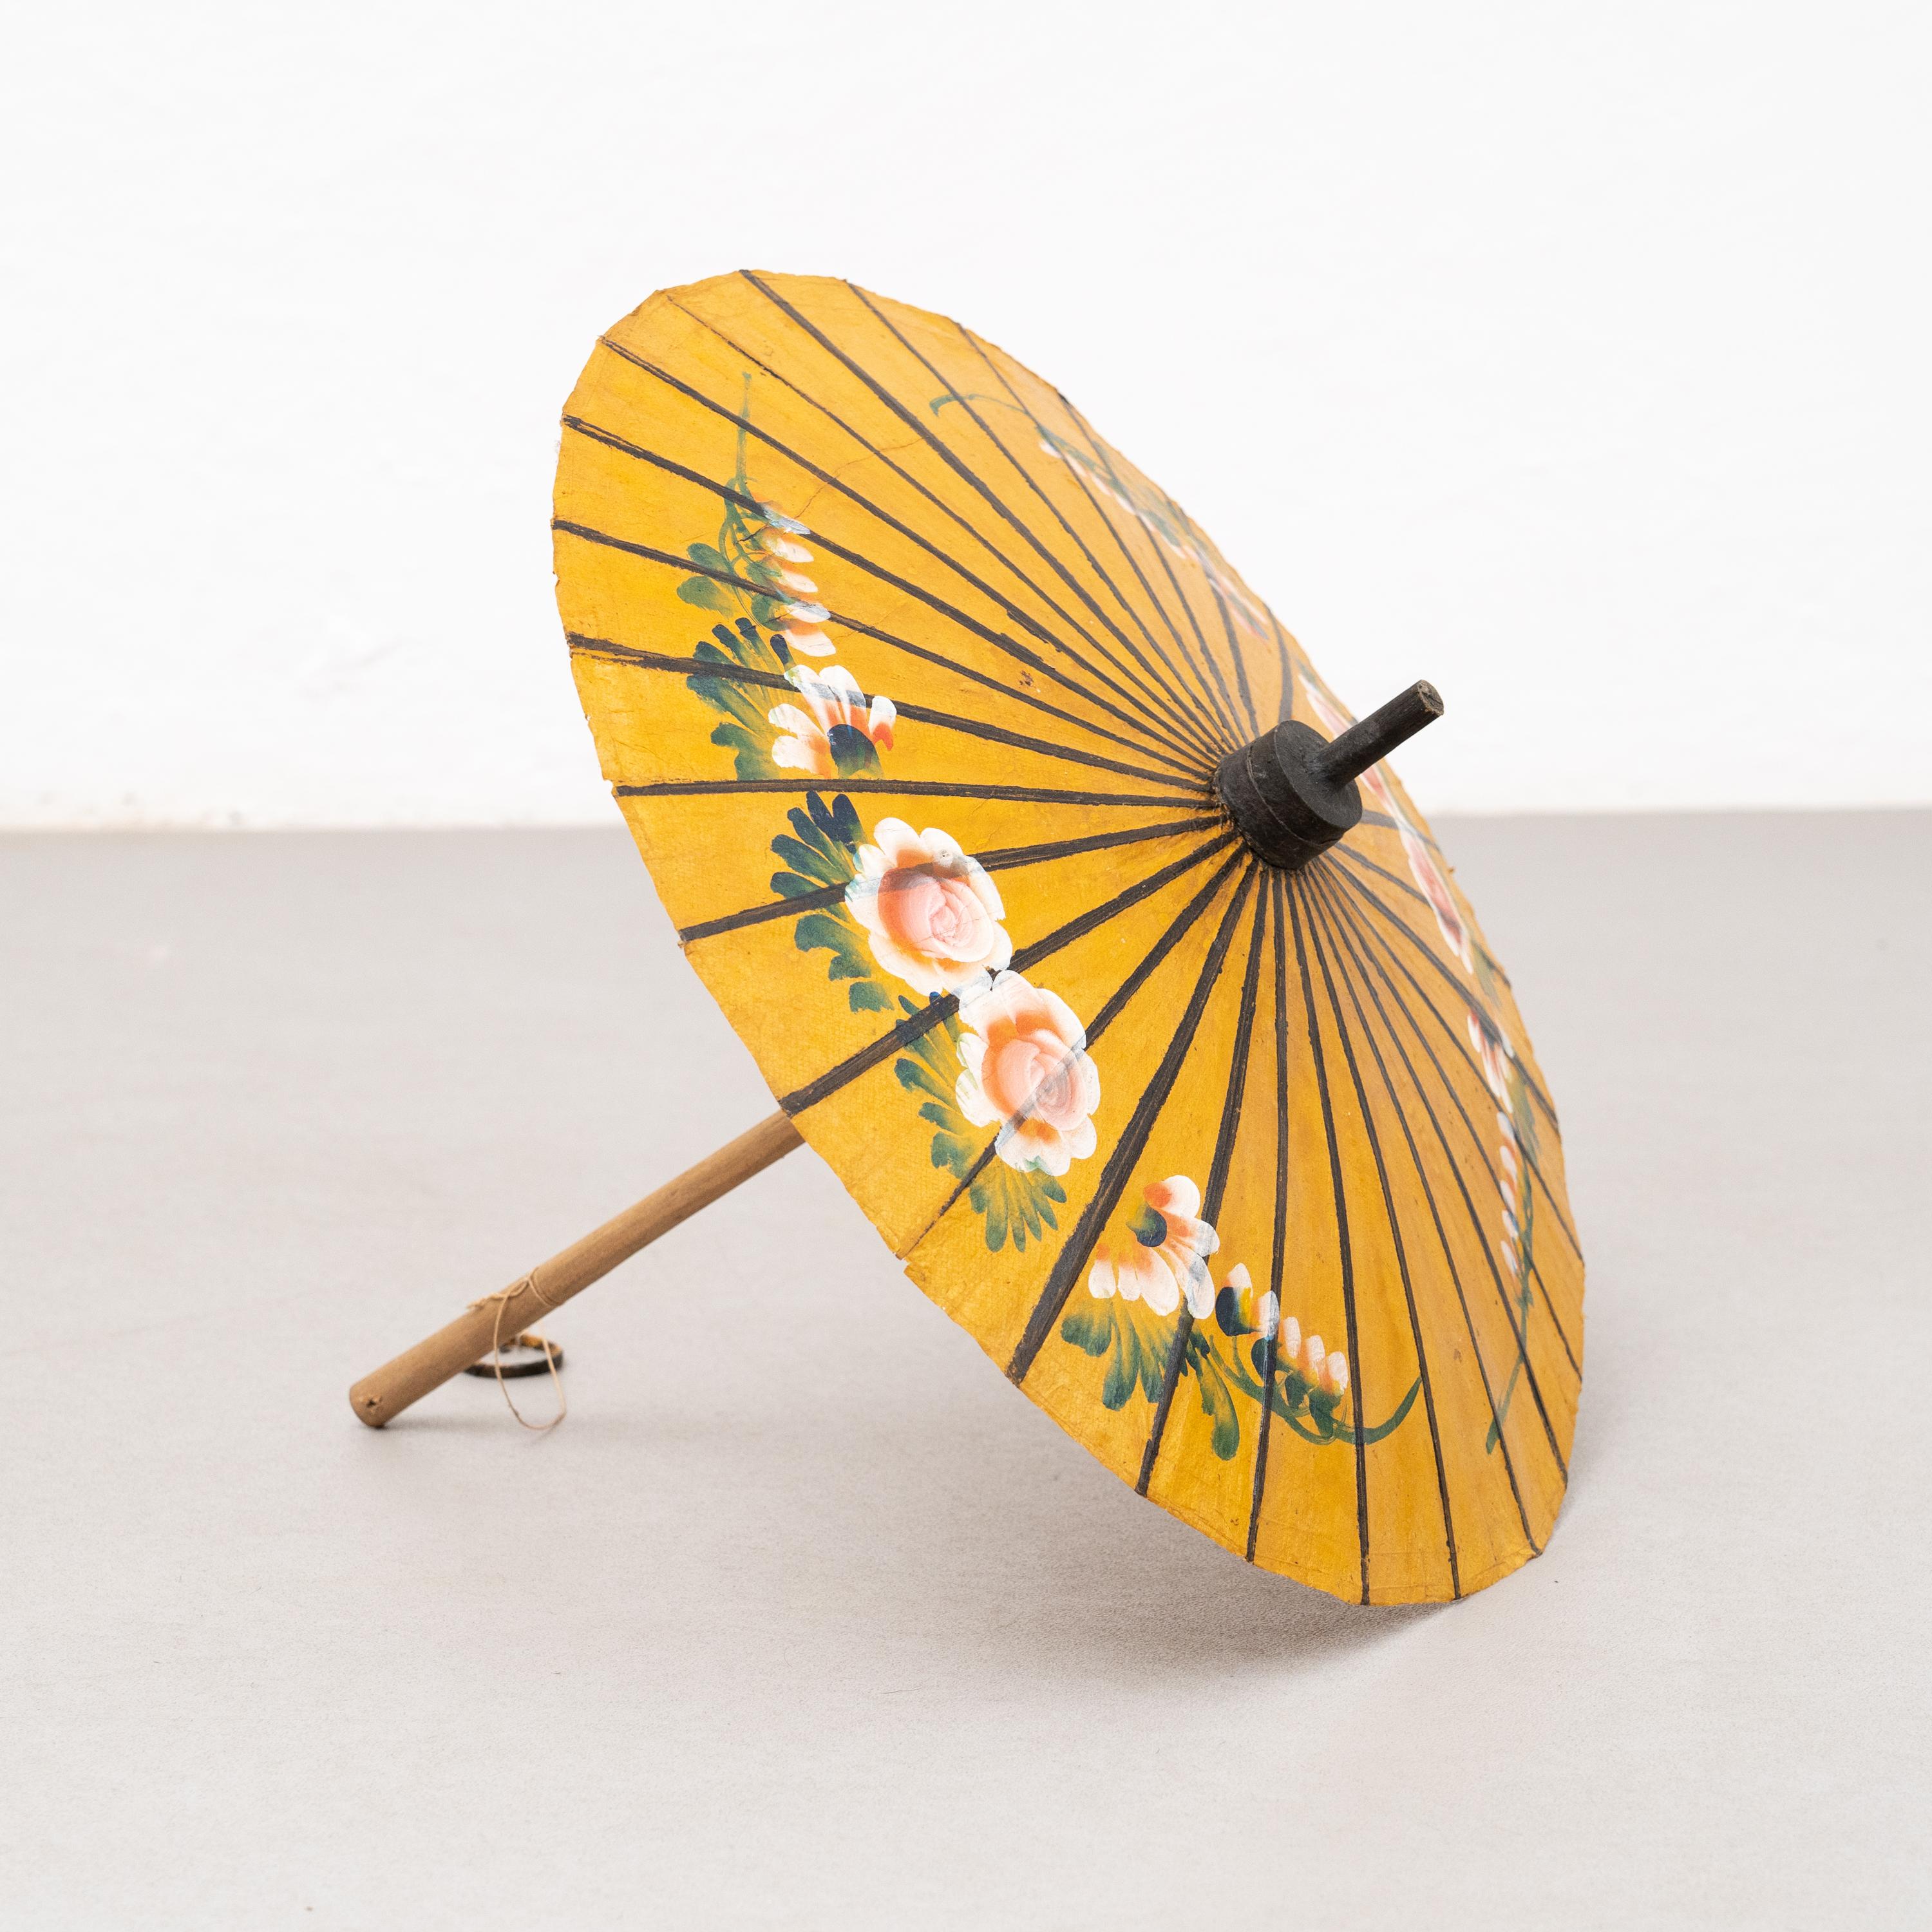 Handpainted bamboo umbrella.

By unknown artist, circa 1950

In original condition, with some visible signs of previous use and age, preserving a beautiful patina.

Materials:
Bamboo.

